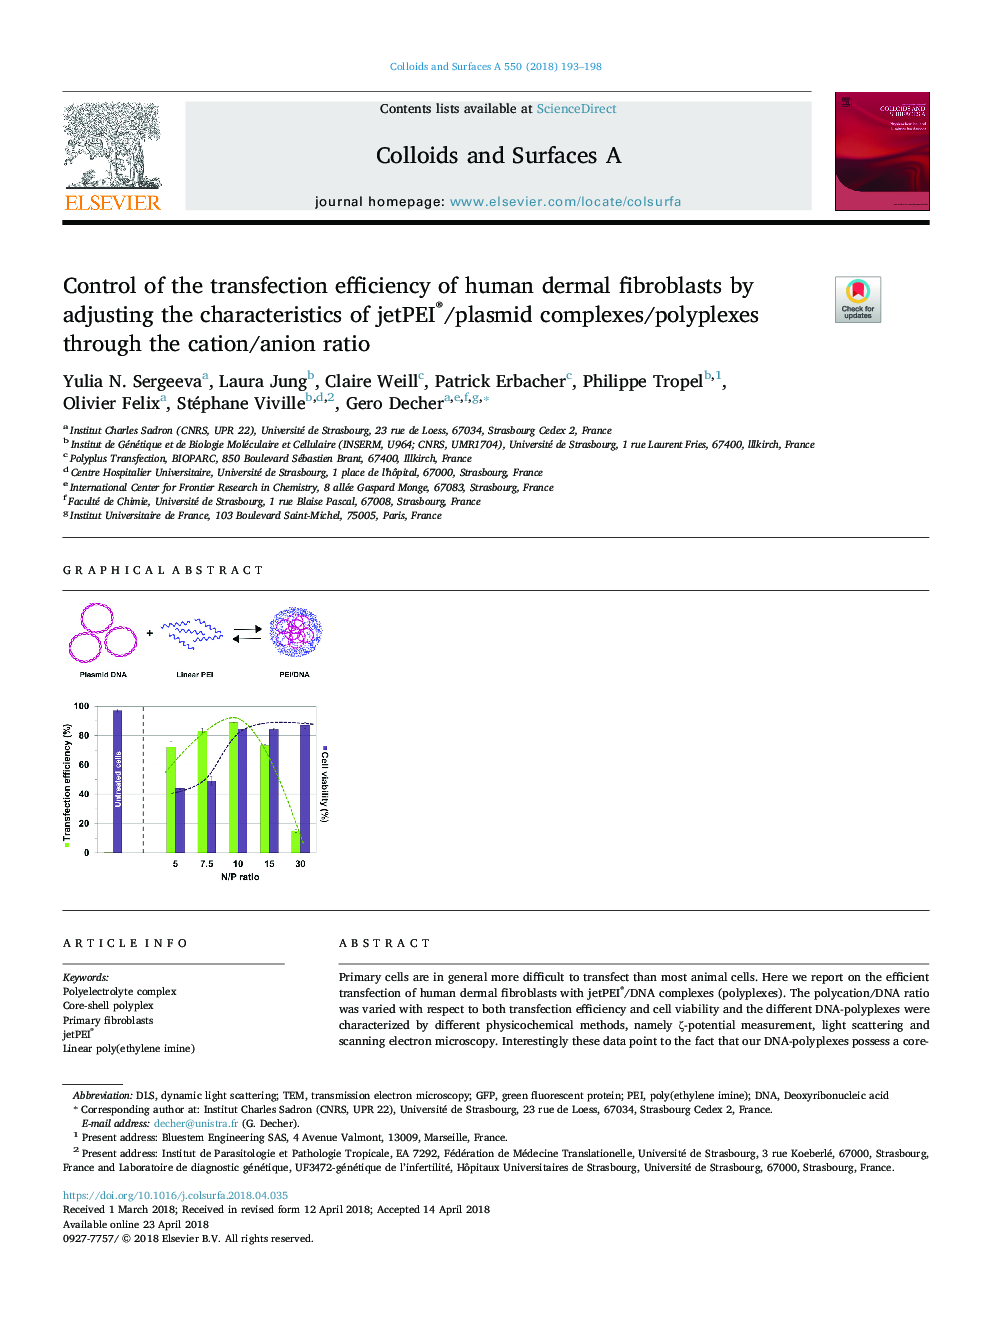 Control of the transfection efficiency of human dermal fibroblasts by adjusting the characteristics of jetPEI®/plasmid complexes/polyplexes through the cation/anion ratio